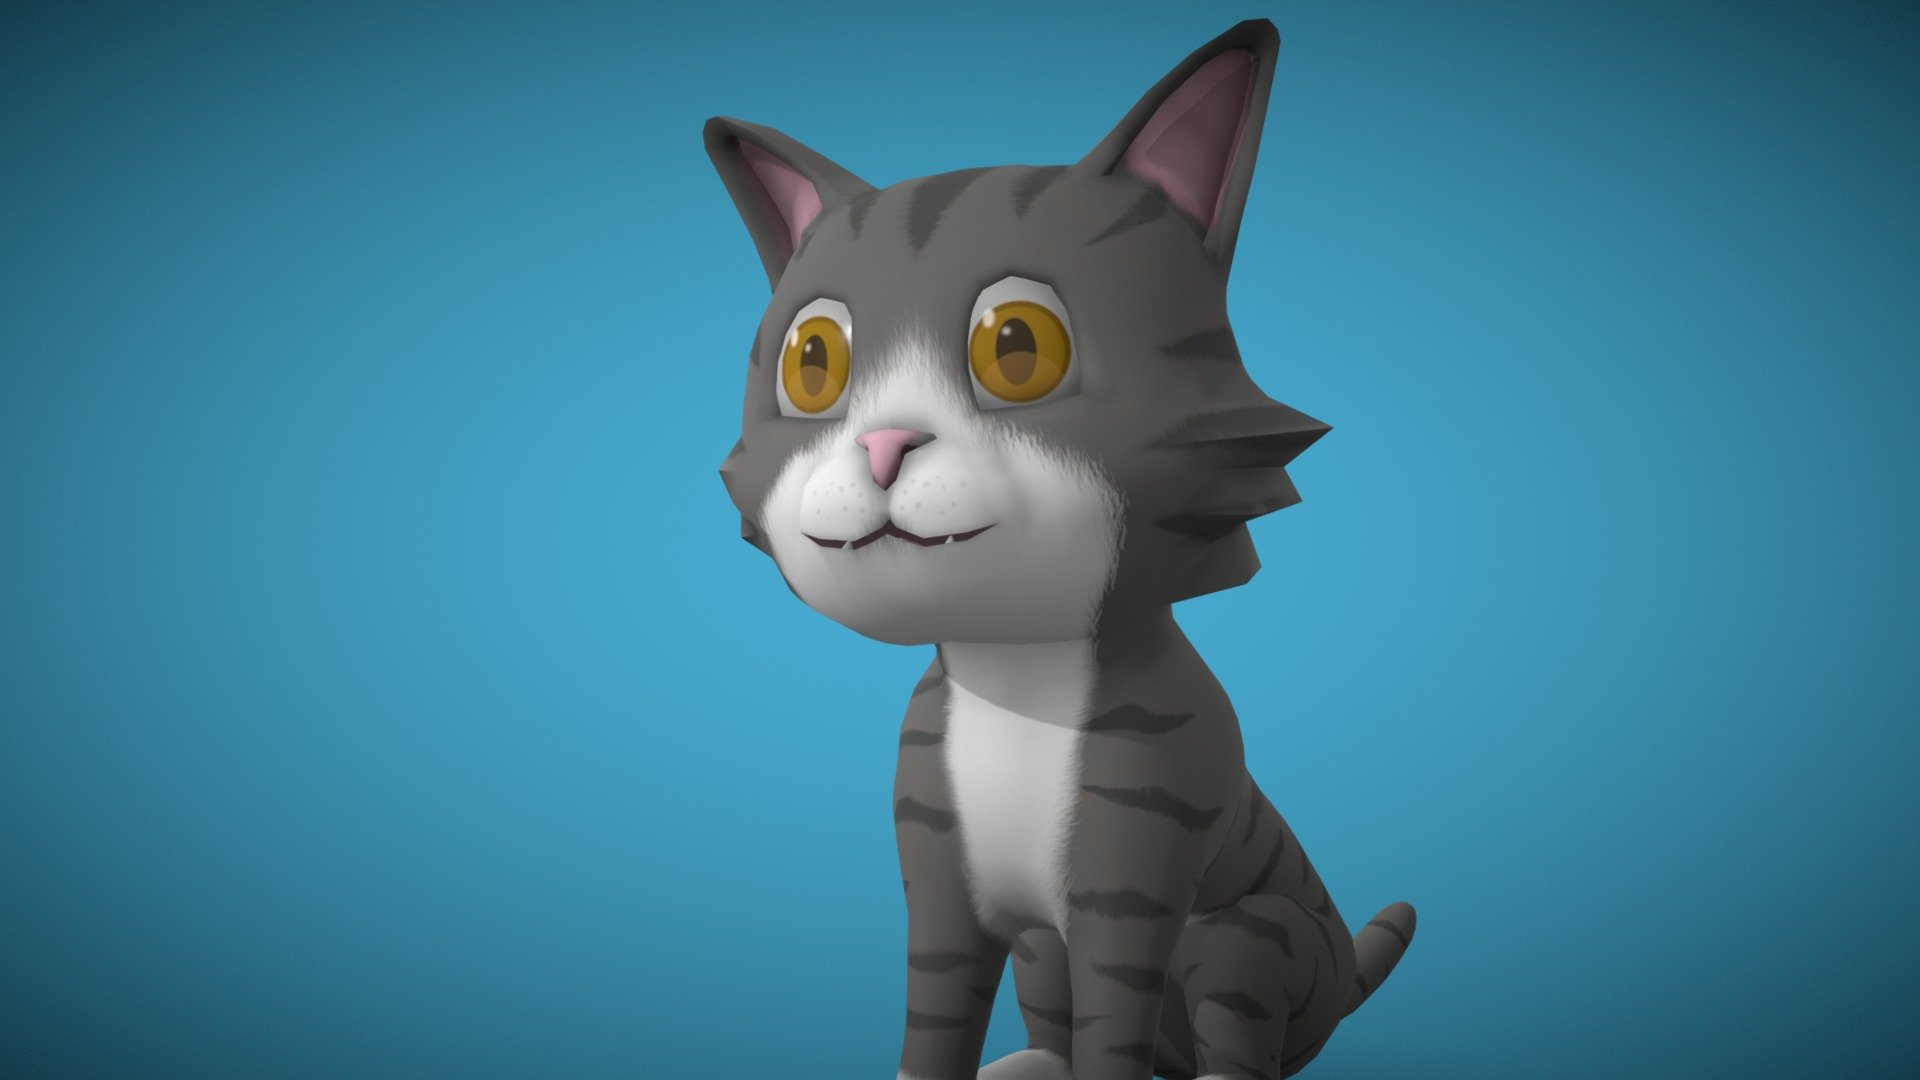 This package consists of a animated low poly Cartoon cat, with 7 texture varients (Ginger,Black, Siamese,Bengal,BrownTabby,GingerTabby and GingerTabby)
In addition to the Base Map texture, there is also a Normal Map, and Specular Map,(all textures are in 1k. The eye colour can be combined with other Fur textures, There are a few accessories for the cat.
If you experience any problem with this asset, please contact me by my email for support.




There are 15 animations for the cats



Walk

Trot

Run

Jump

Eat

Idle Breath

Idle Stretch

Sleep

Sleep Idle

Sit

Sit Idle

Sit Clean

Meow

Attack Left

Attack Right


Model specifications
Cartoon Cat
Contains LODs:
LOD0 Triangle Count: 7298
LOD1 Triangle Count: 4421
LOD2 Triangle Count: 3417
LOD3 Trinagle Count: 2139

Collar
Triangle Count: 640

Collar Pumpkin
Triangle Count: 604

Witche Hat
Triangle Count: 892 - Cat Cartoon - Buy Royalty Free 3D model by Luna (@Luna_04) 3d model